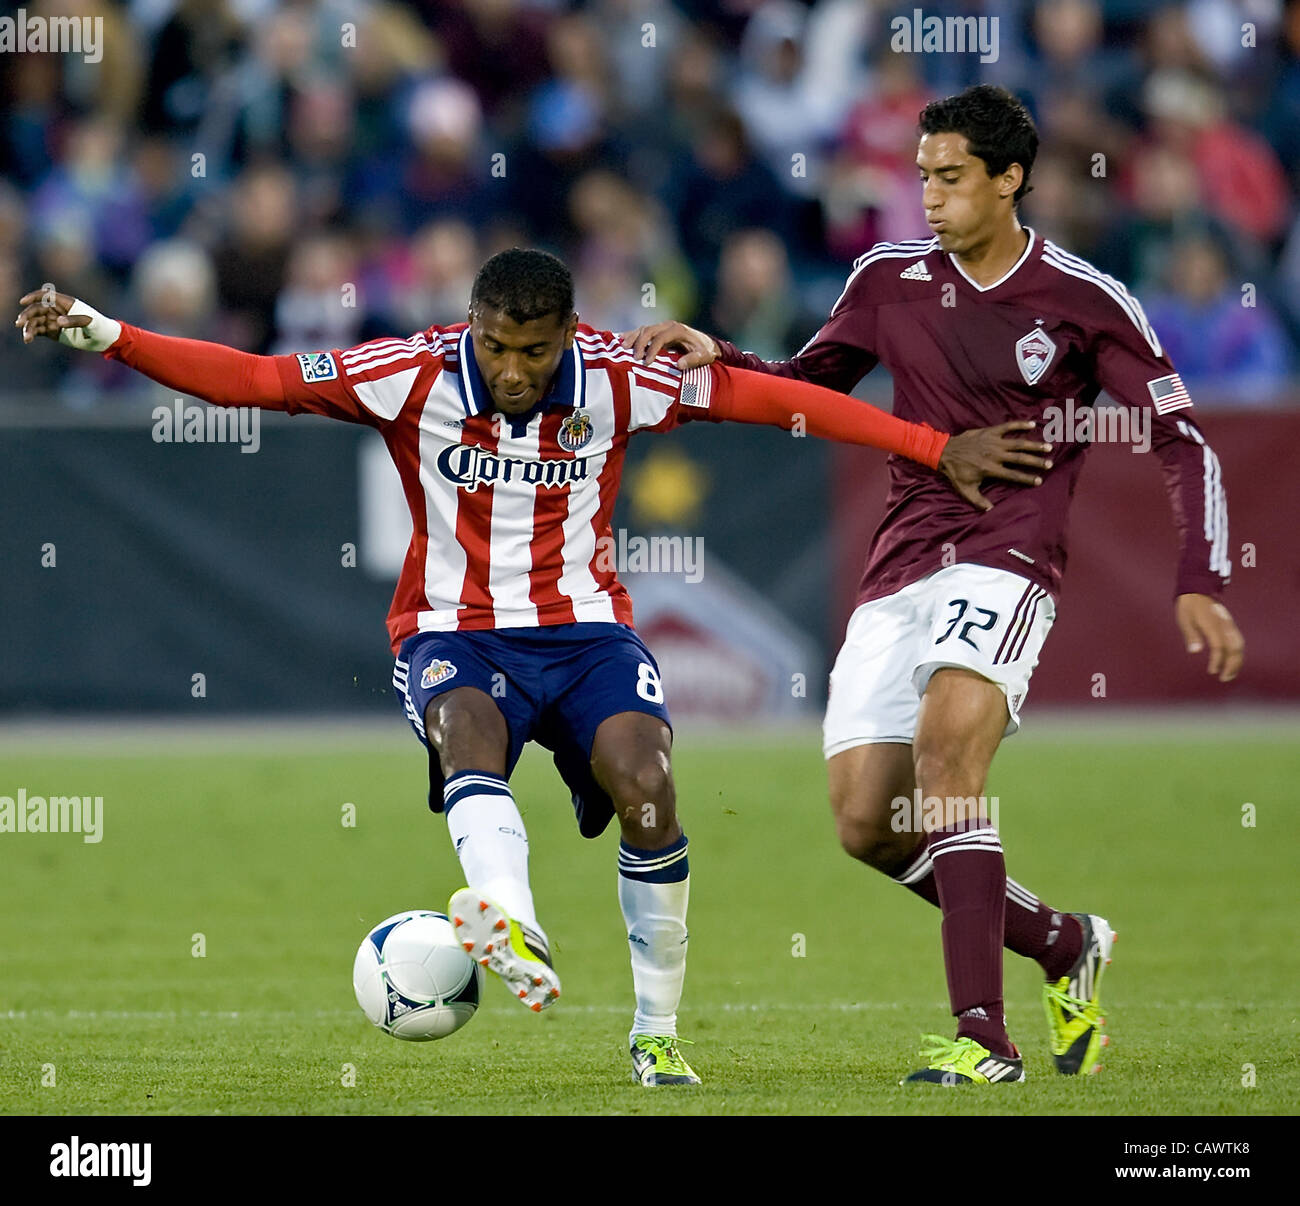 April 28, 2012 - Commerce City, CO, USA - OSWALDO MINDA, left, of Chivas USA fights for control of the ball with TONY CASCIO, right, of the Colorado Rapids in the 1st. half at Dicks Sporting Goods Park Saturday night. The Rapids defeat Chivas USA 4-0. (Credit Image: © Hector Acevedo/ZUMAPRESS.com) Stock Photo